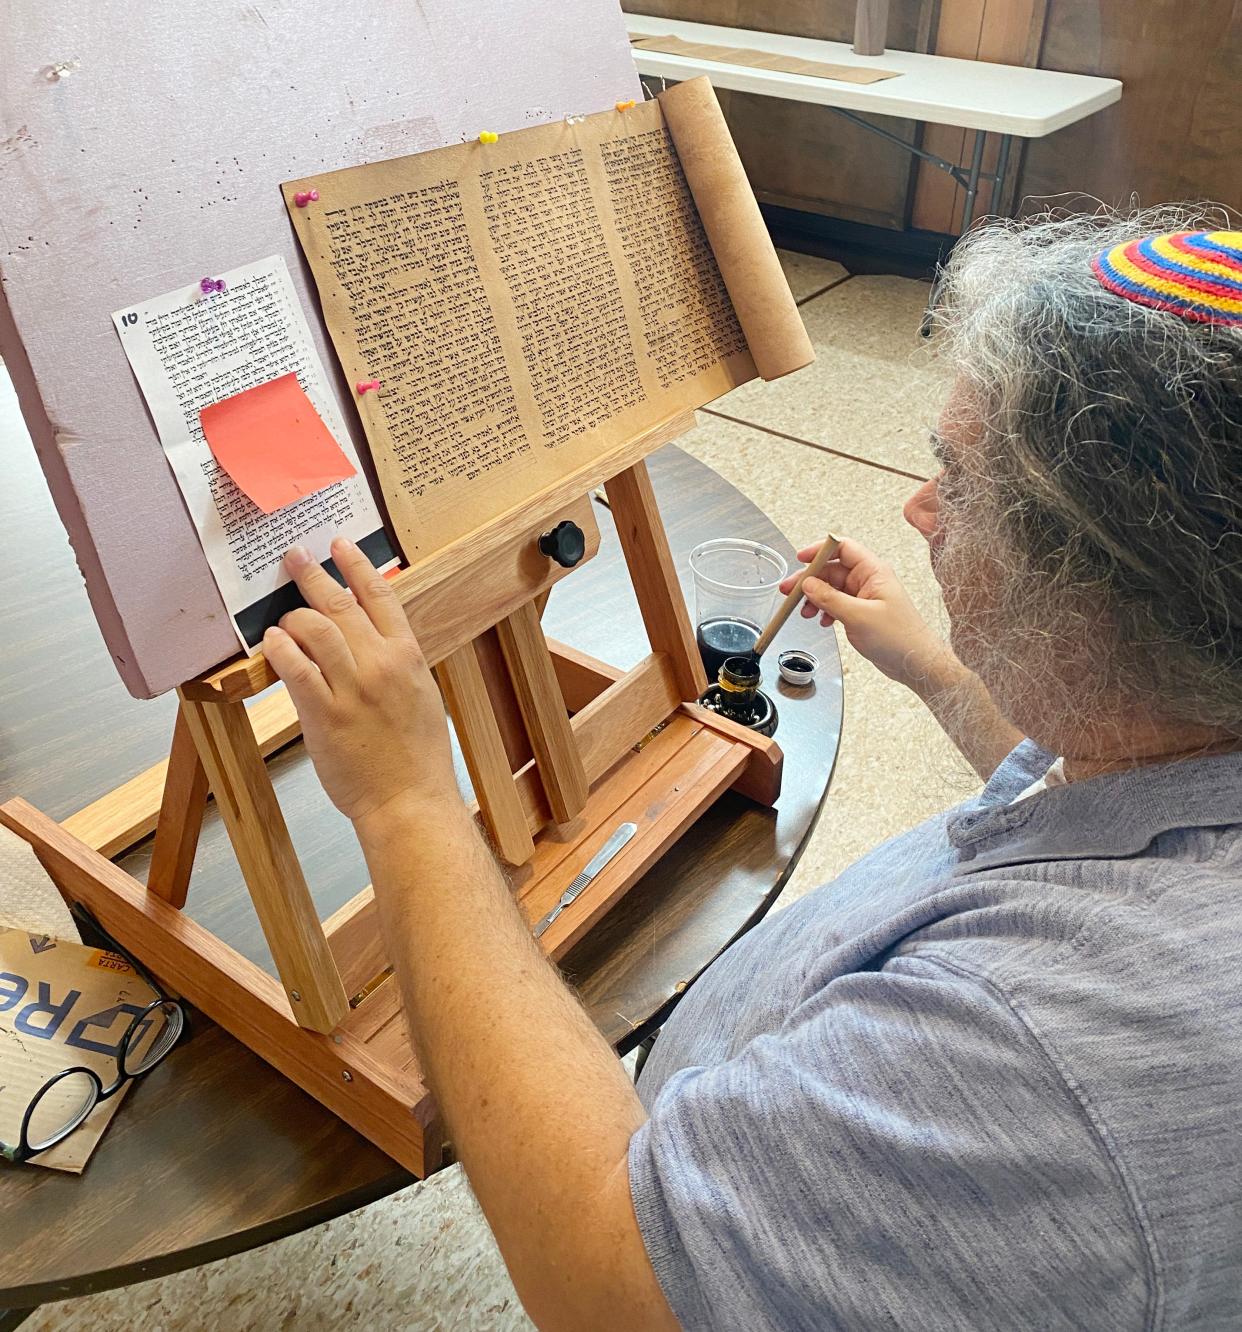 Rabbi Juan Mejia, at Oklahoma City's Emanuel Synagogue, works on a parchment scroll inscribed with The Megillah — the Book of Esther — that was created by Oklahoma-based The Kedusha Project.